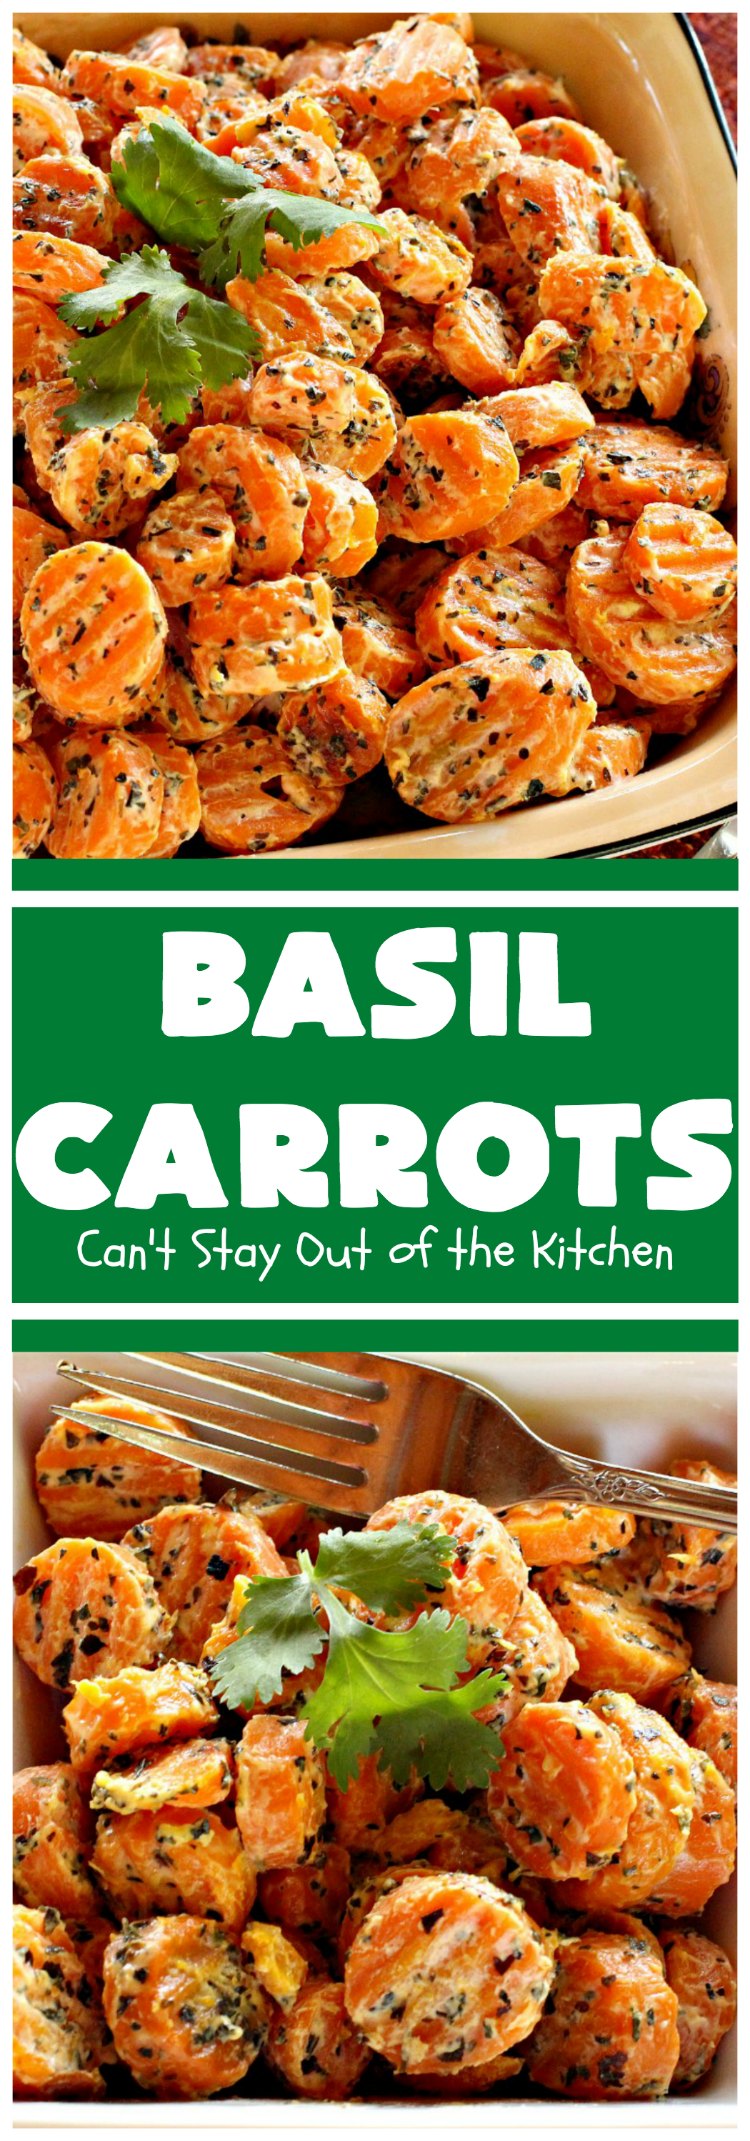 Basil Carrots | Can't Stay Out of the Kitchen